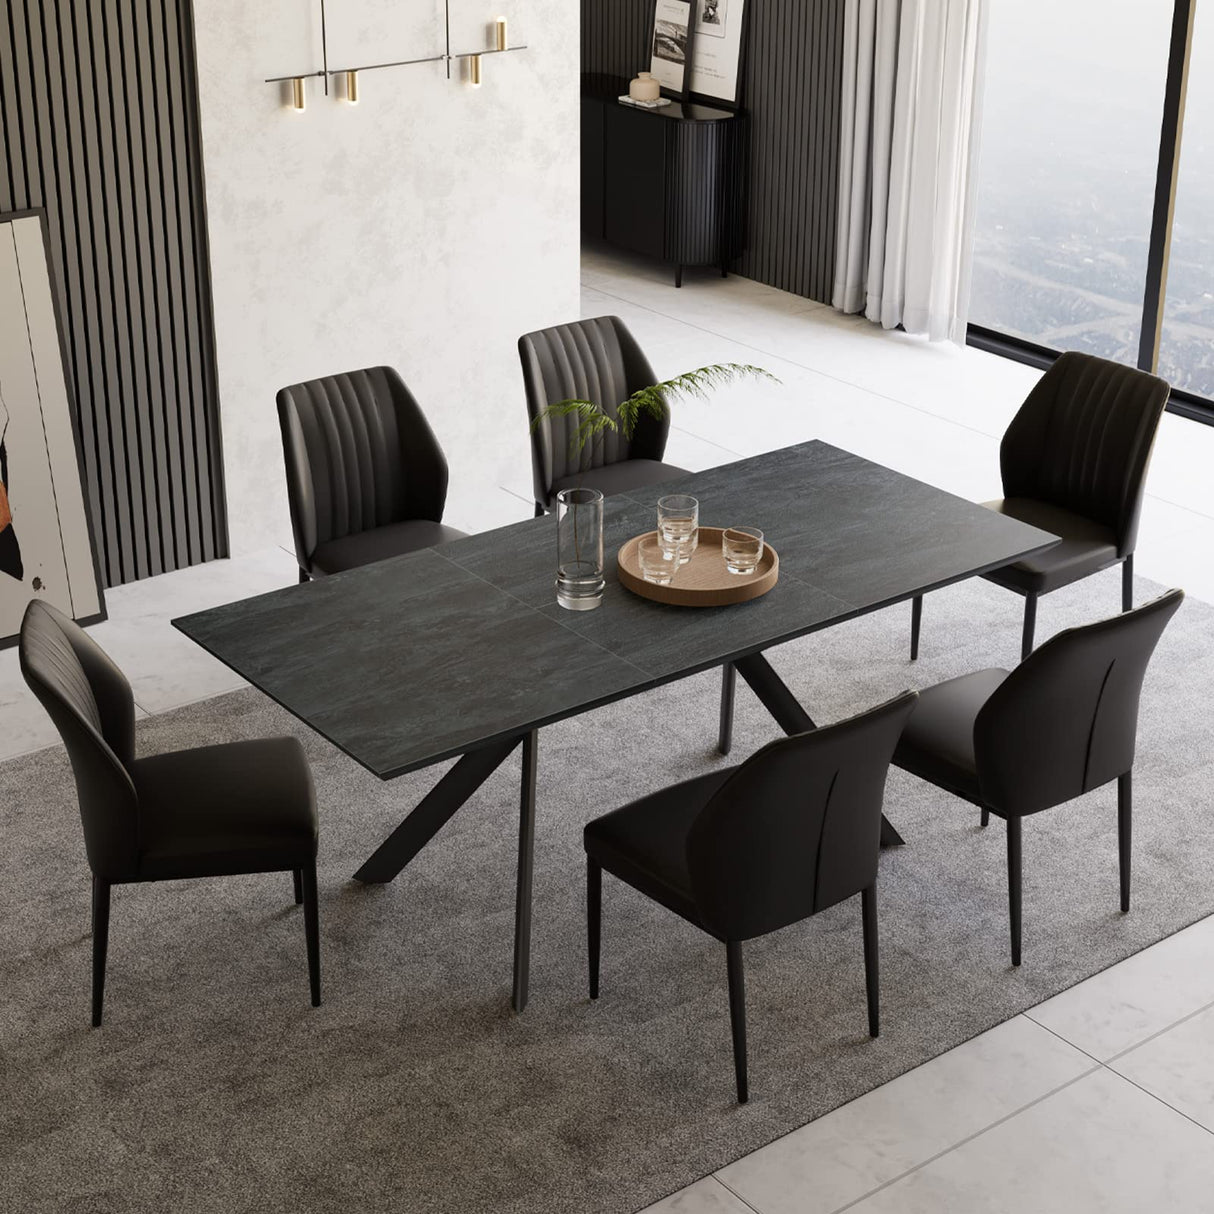 Extendable Dining Table Set for 6-8